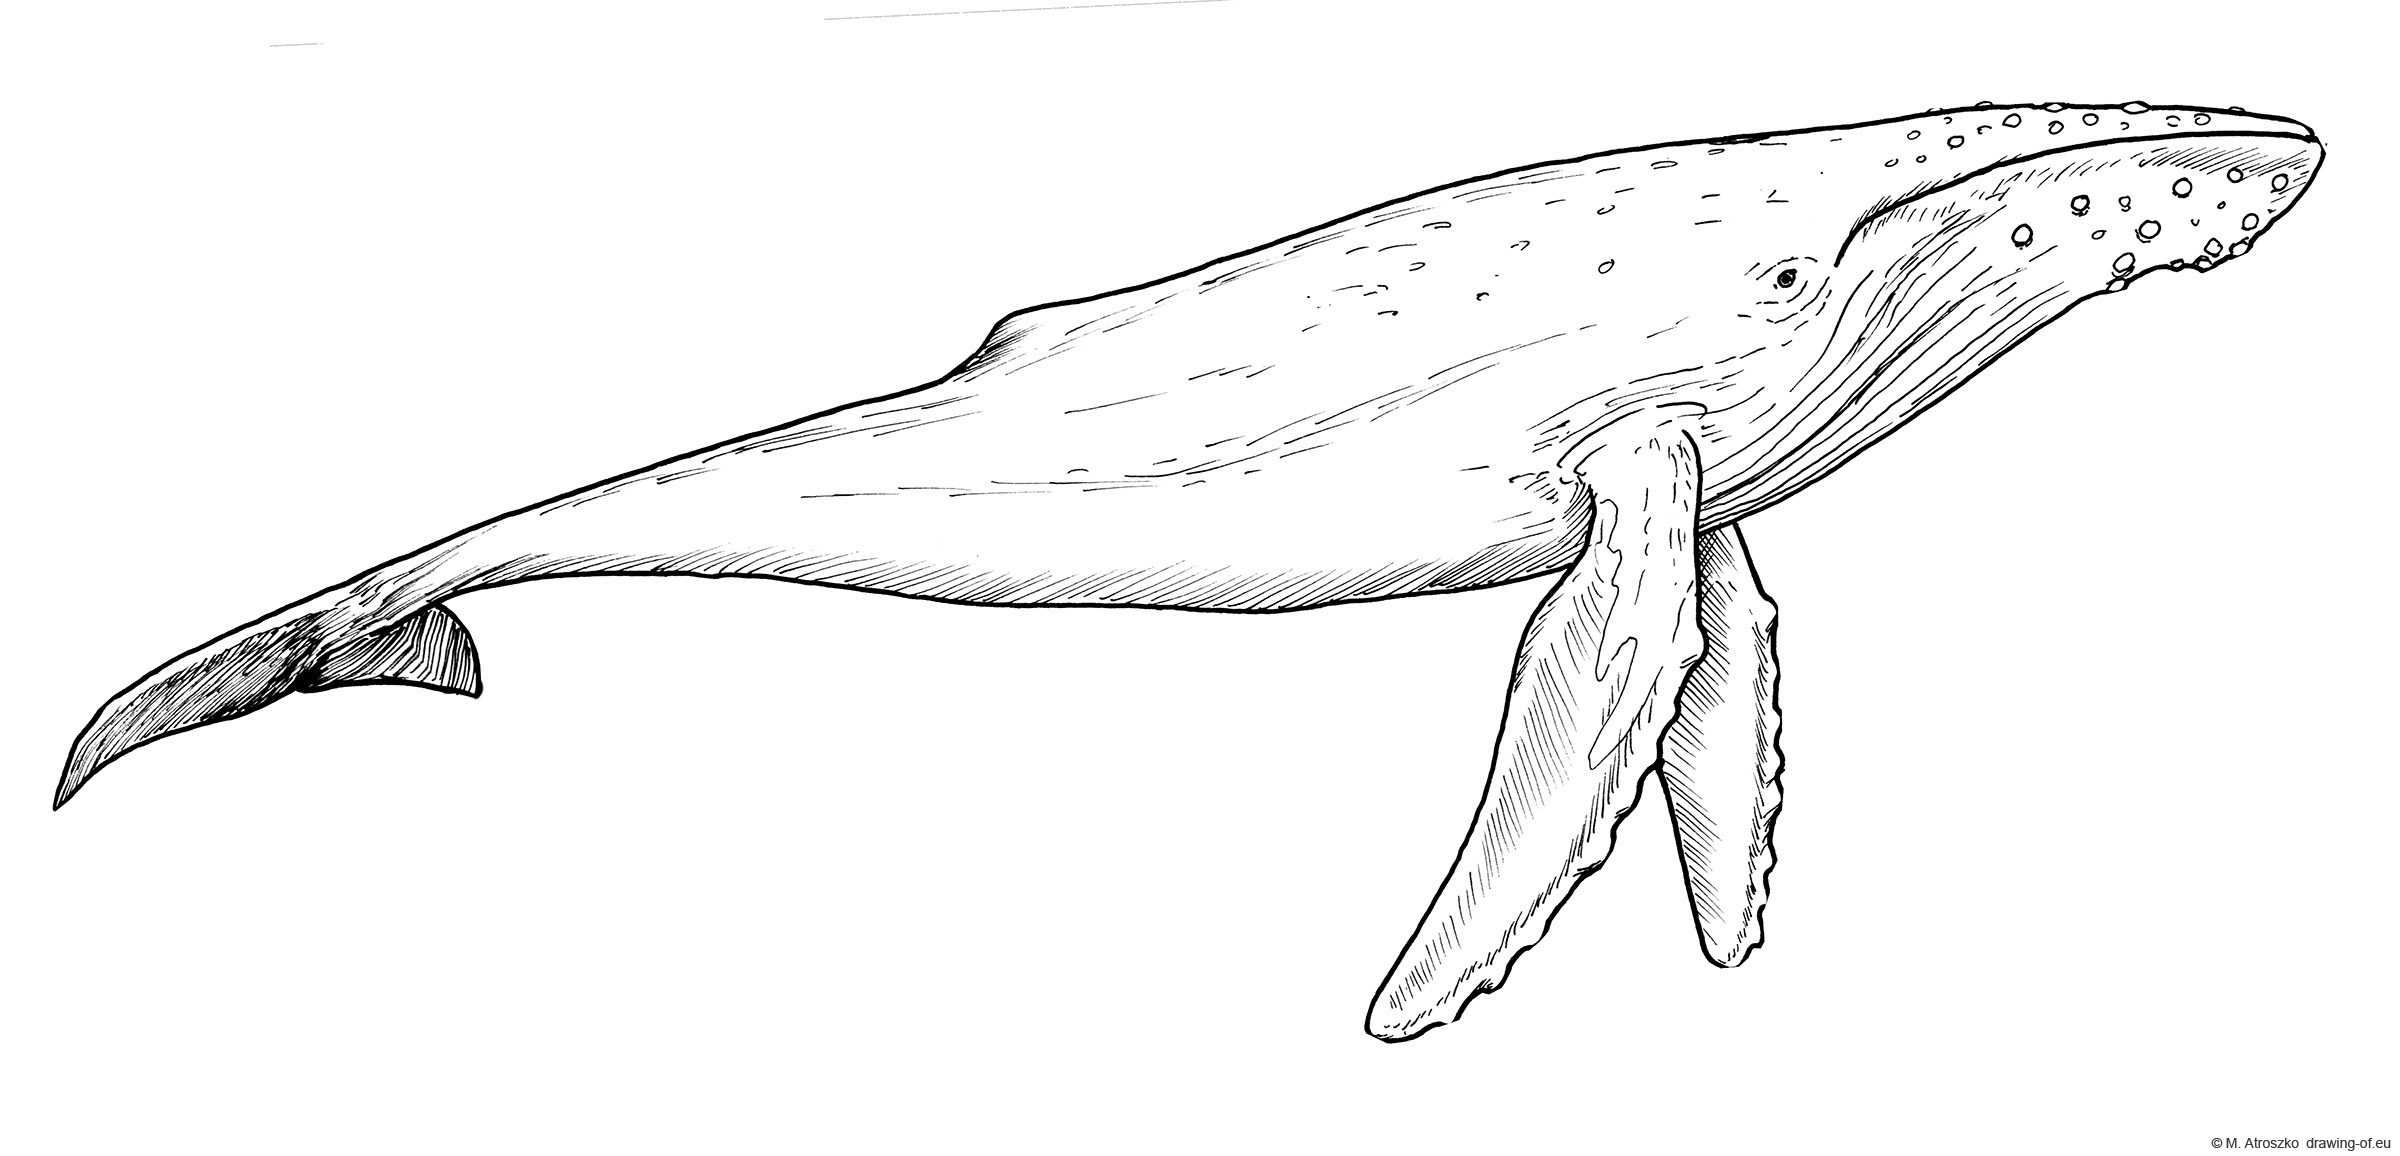 Drawing of humpback whale